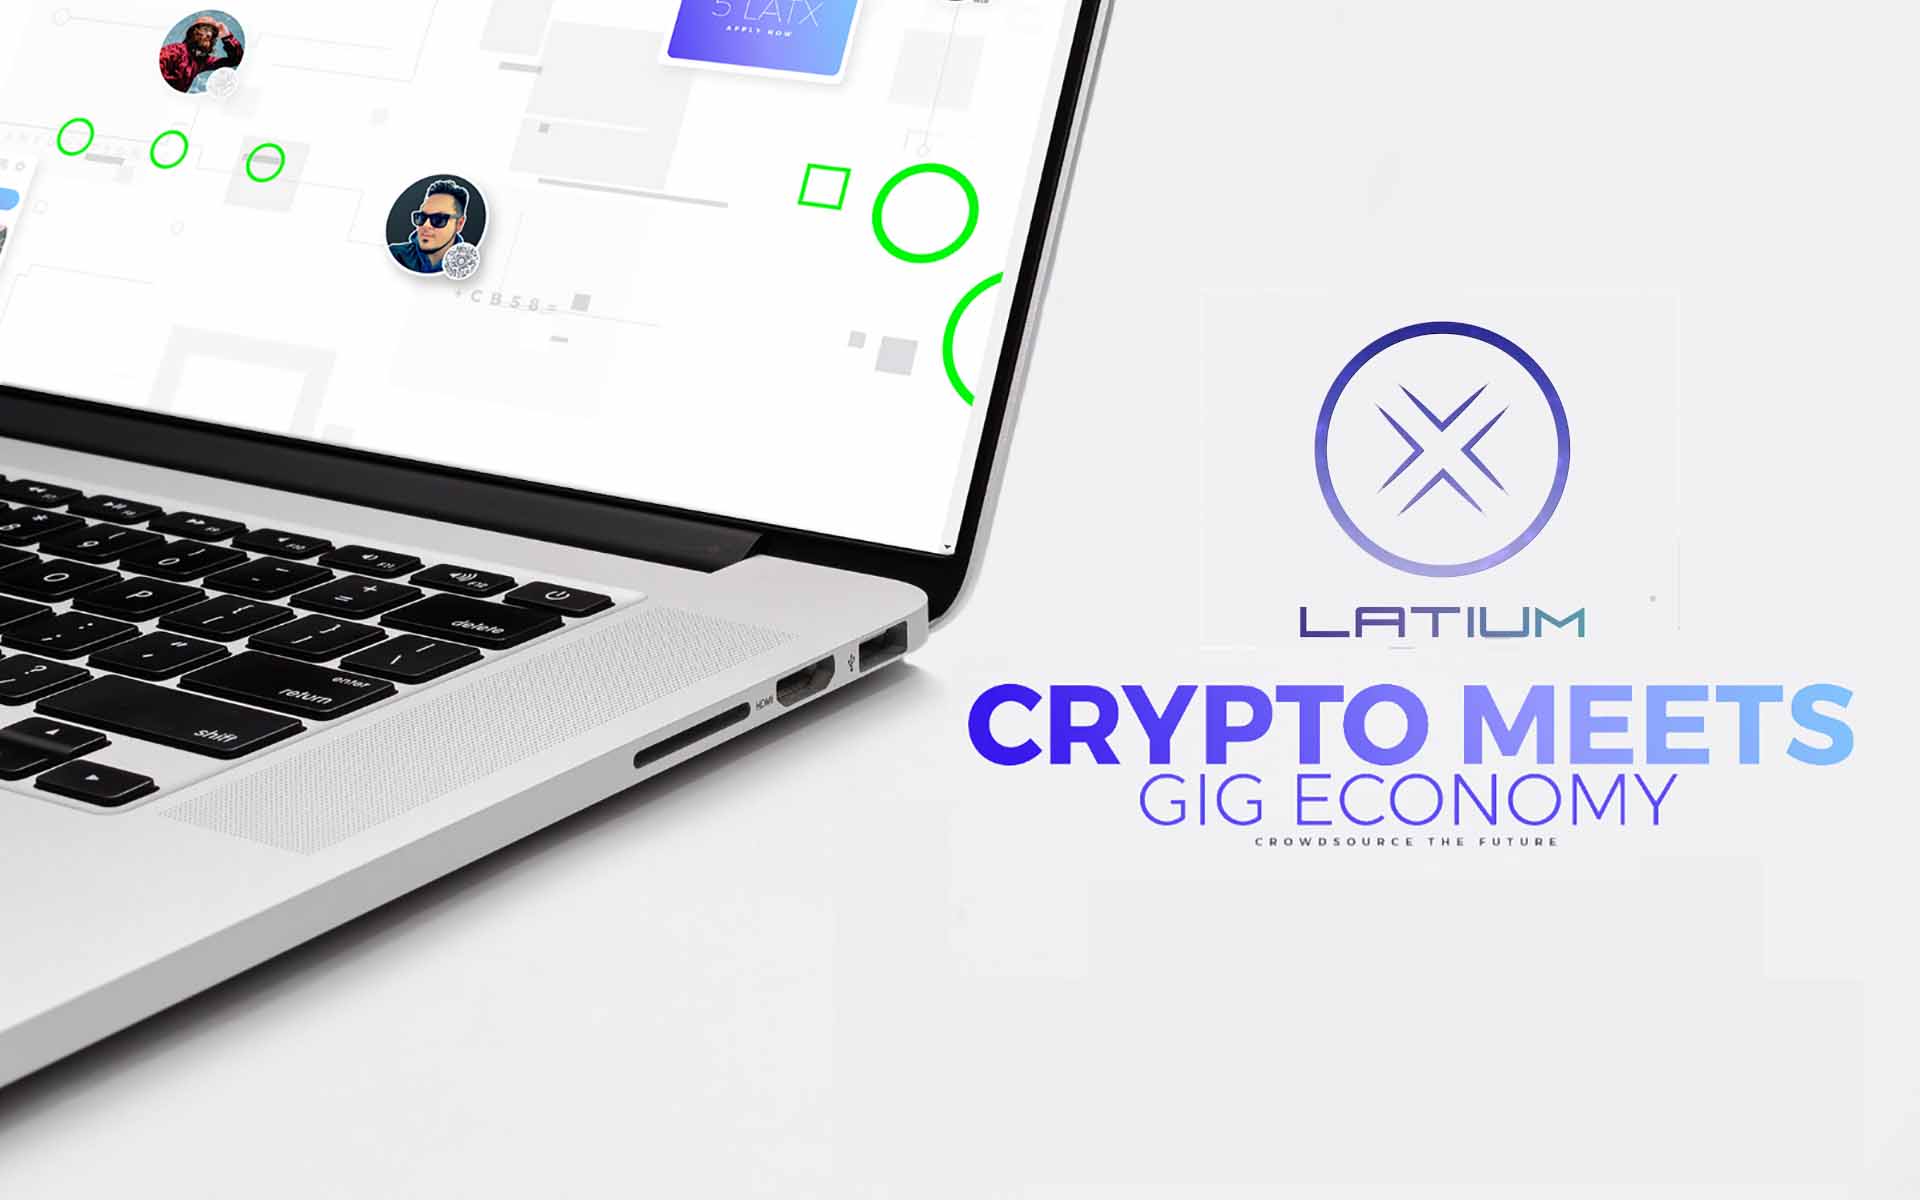 LATIUM Launches Revolutionary New Platform For The Gig Economy and Instantly Created A New Paradigm In The Way Gig Workers In The Global Community Interact